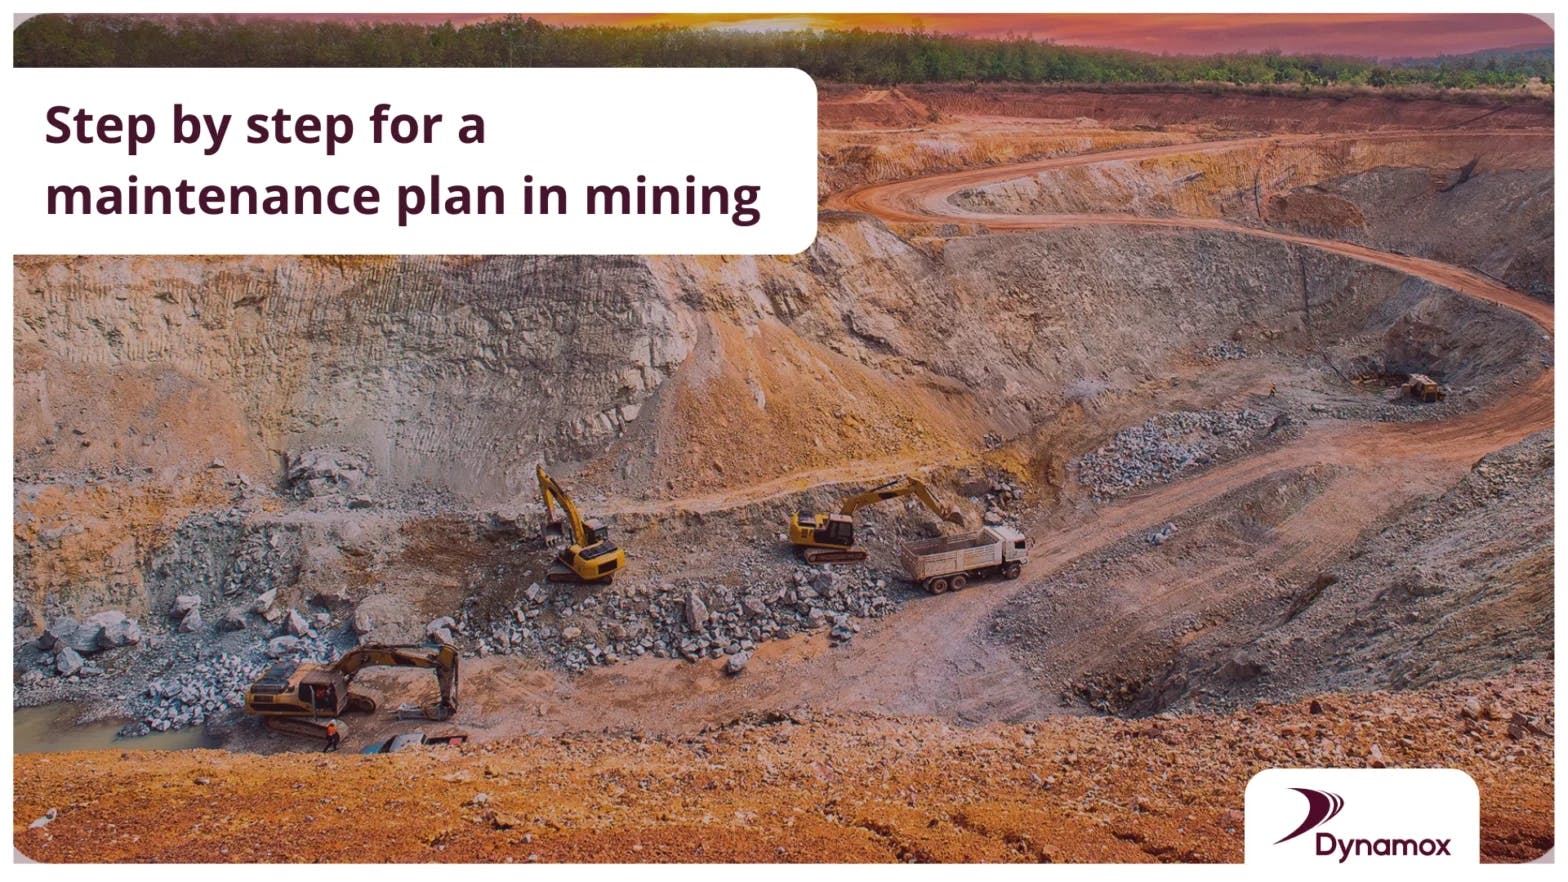 Step by step for a maintenance plan in mining